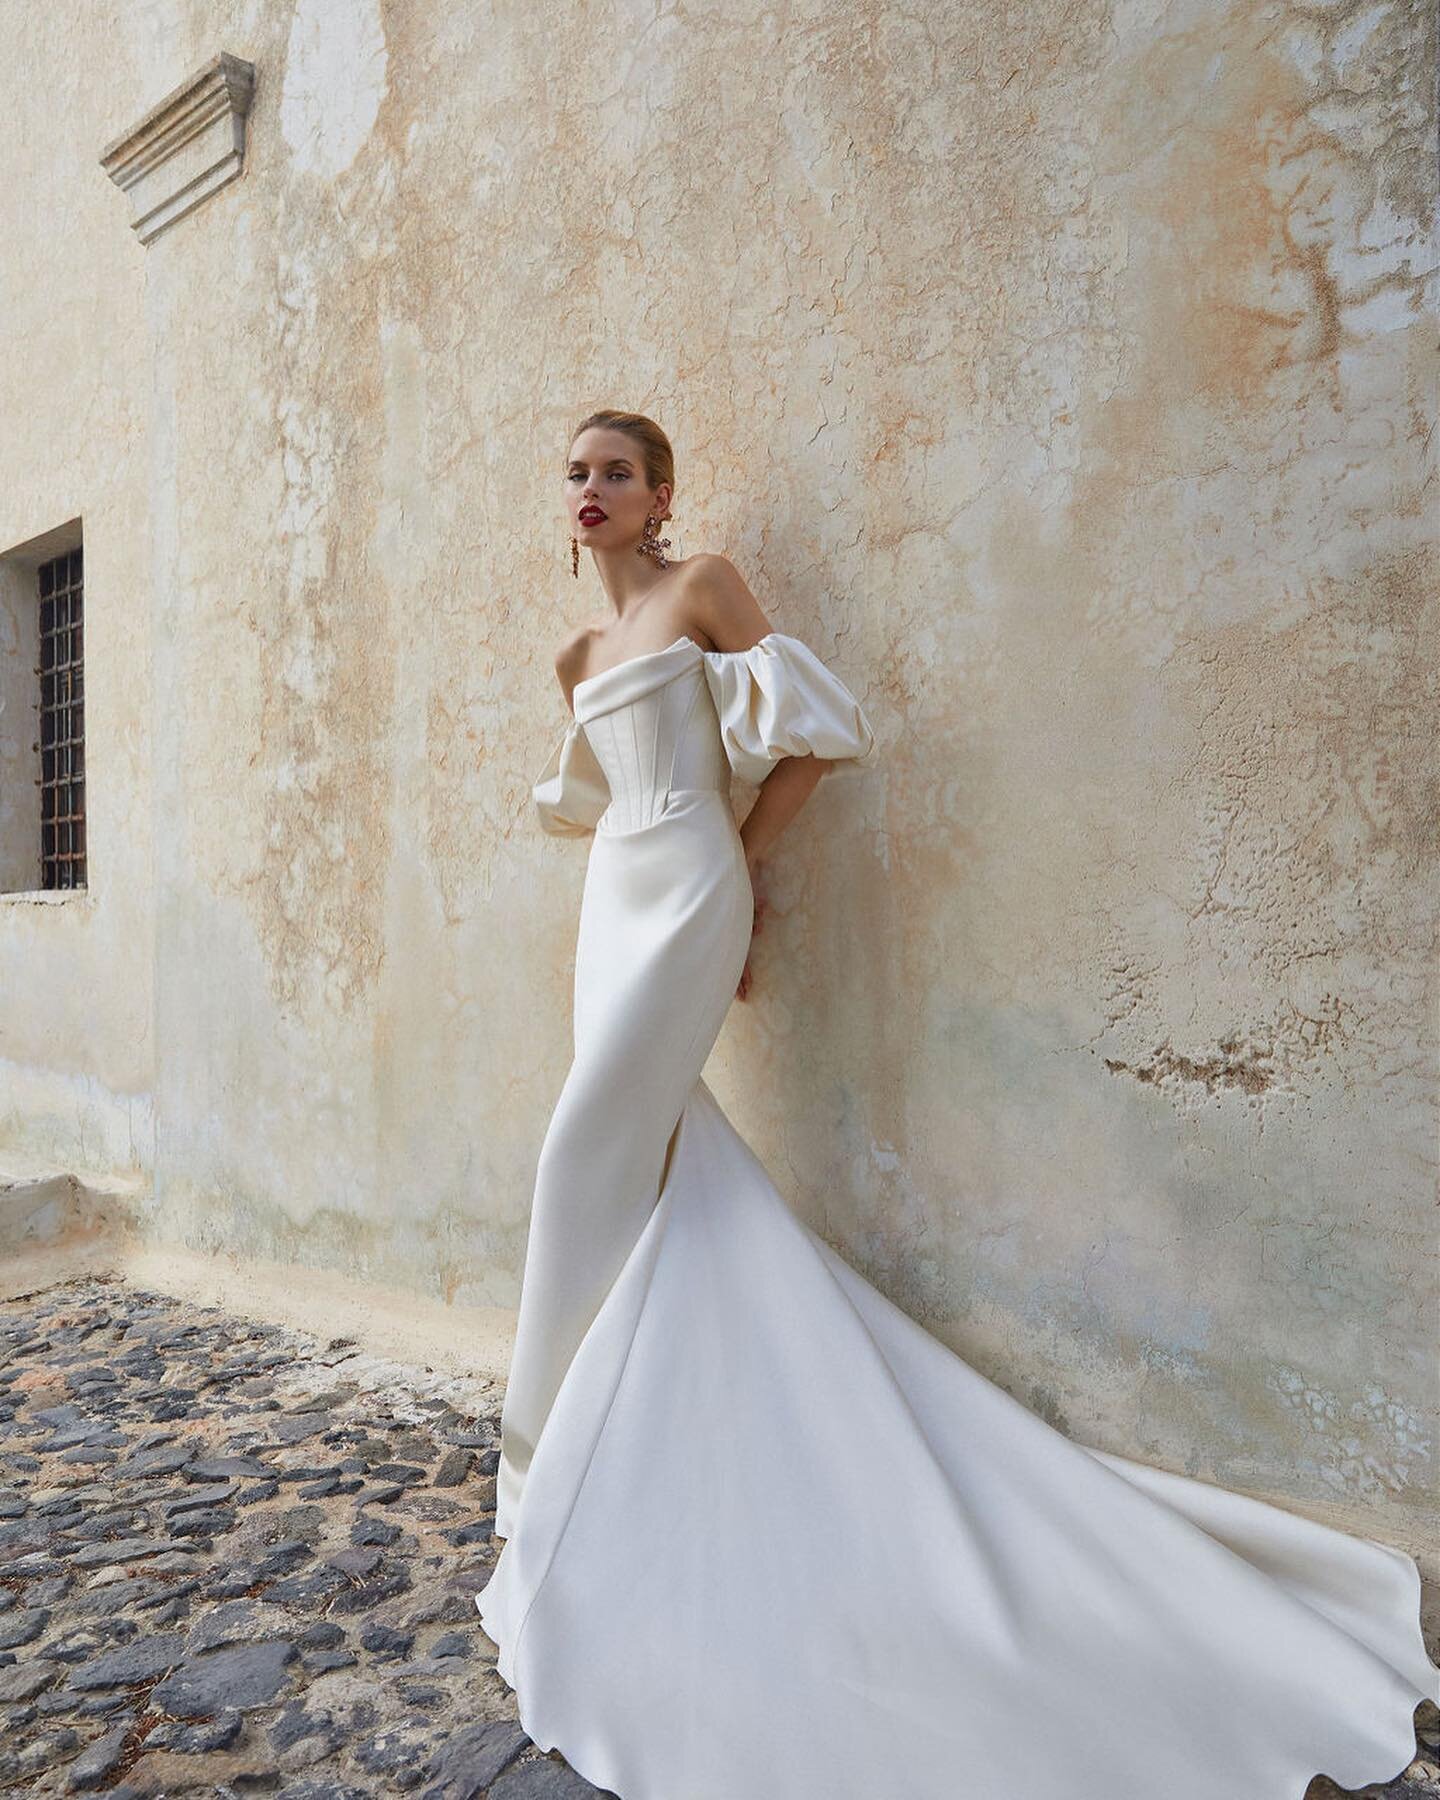 SARAH SEVEN Trunk Show next weekend! Come view the latest Bride collection as well as classic @sarahseven favorites. 

Feb 10-12 by appointment only, we have a few spots left! Enjoy a 10% off on us, see you soon, Miami 🥂